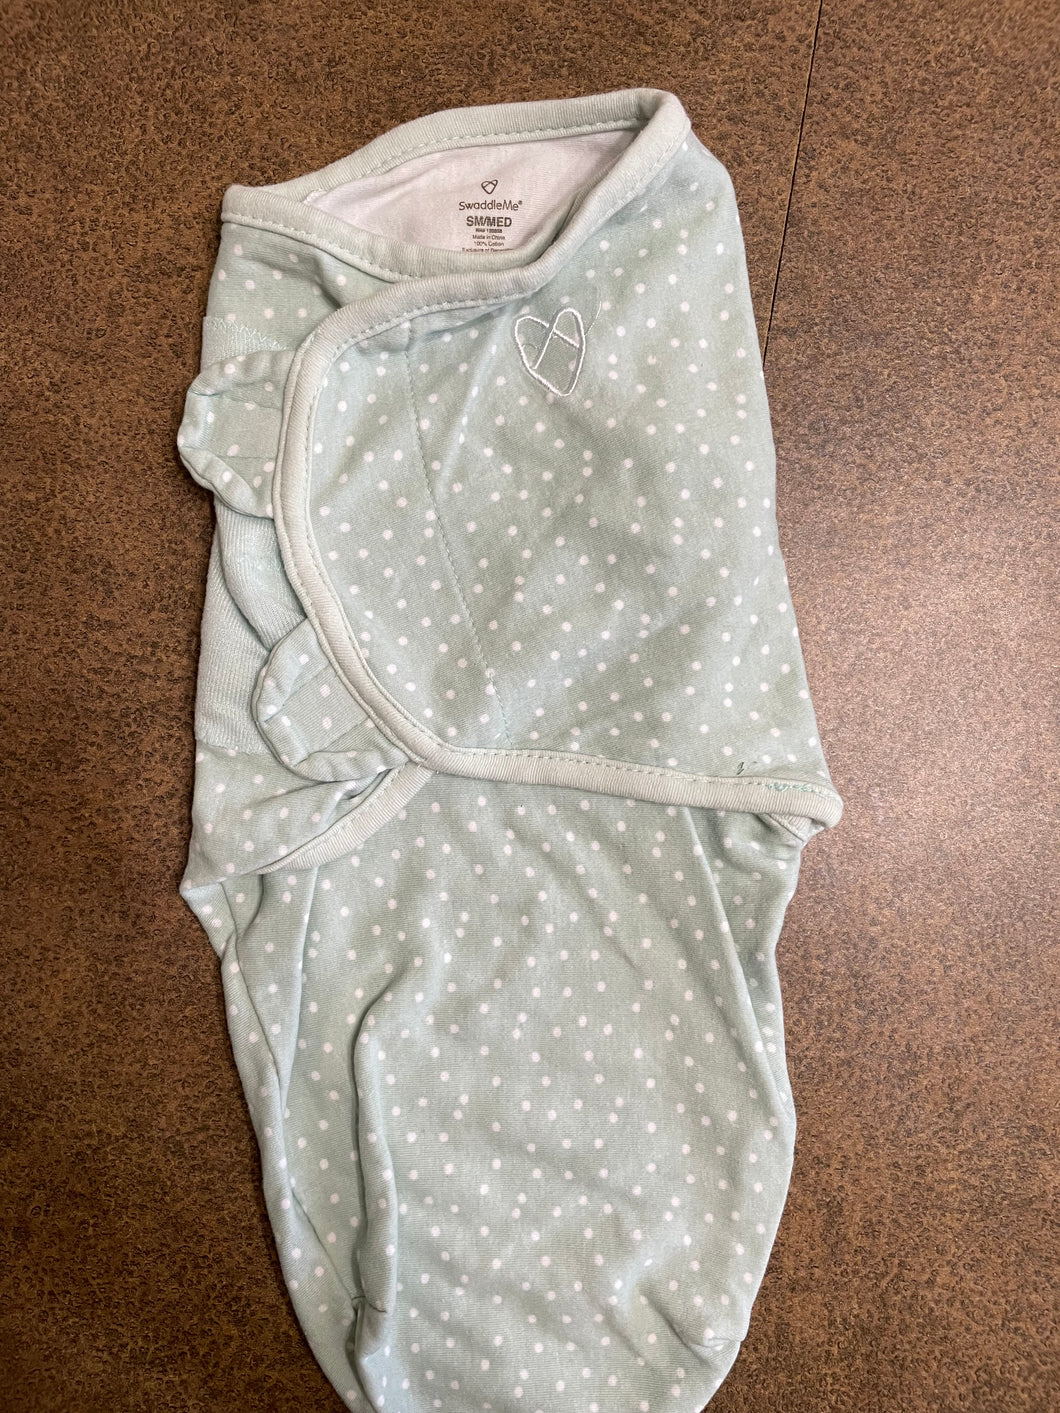 Swaddle Me Sm/Med Swaddle Small